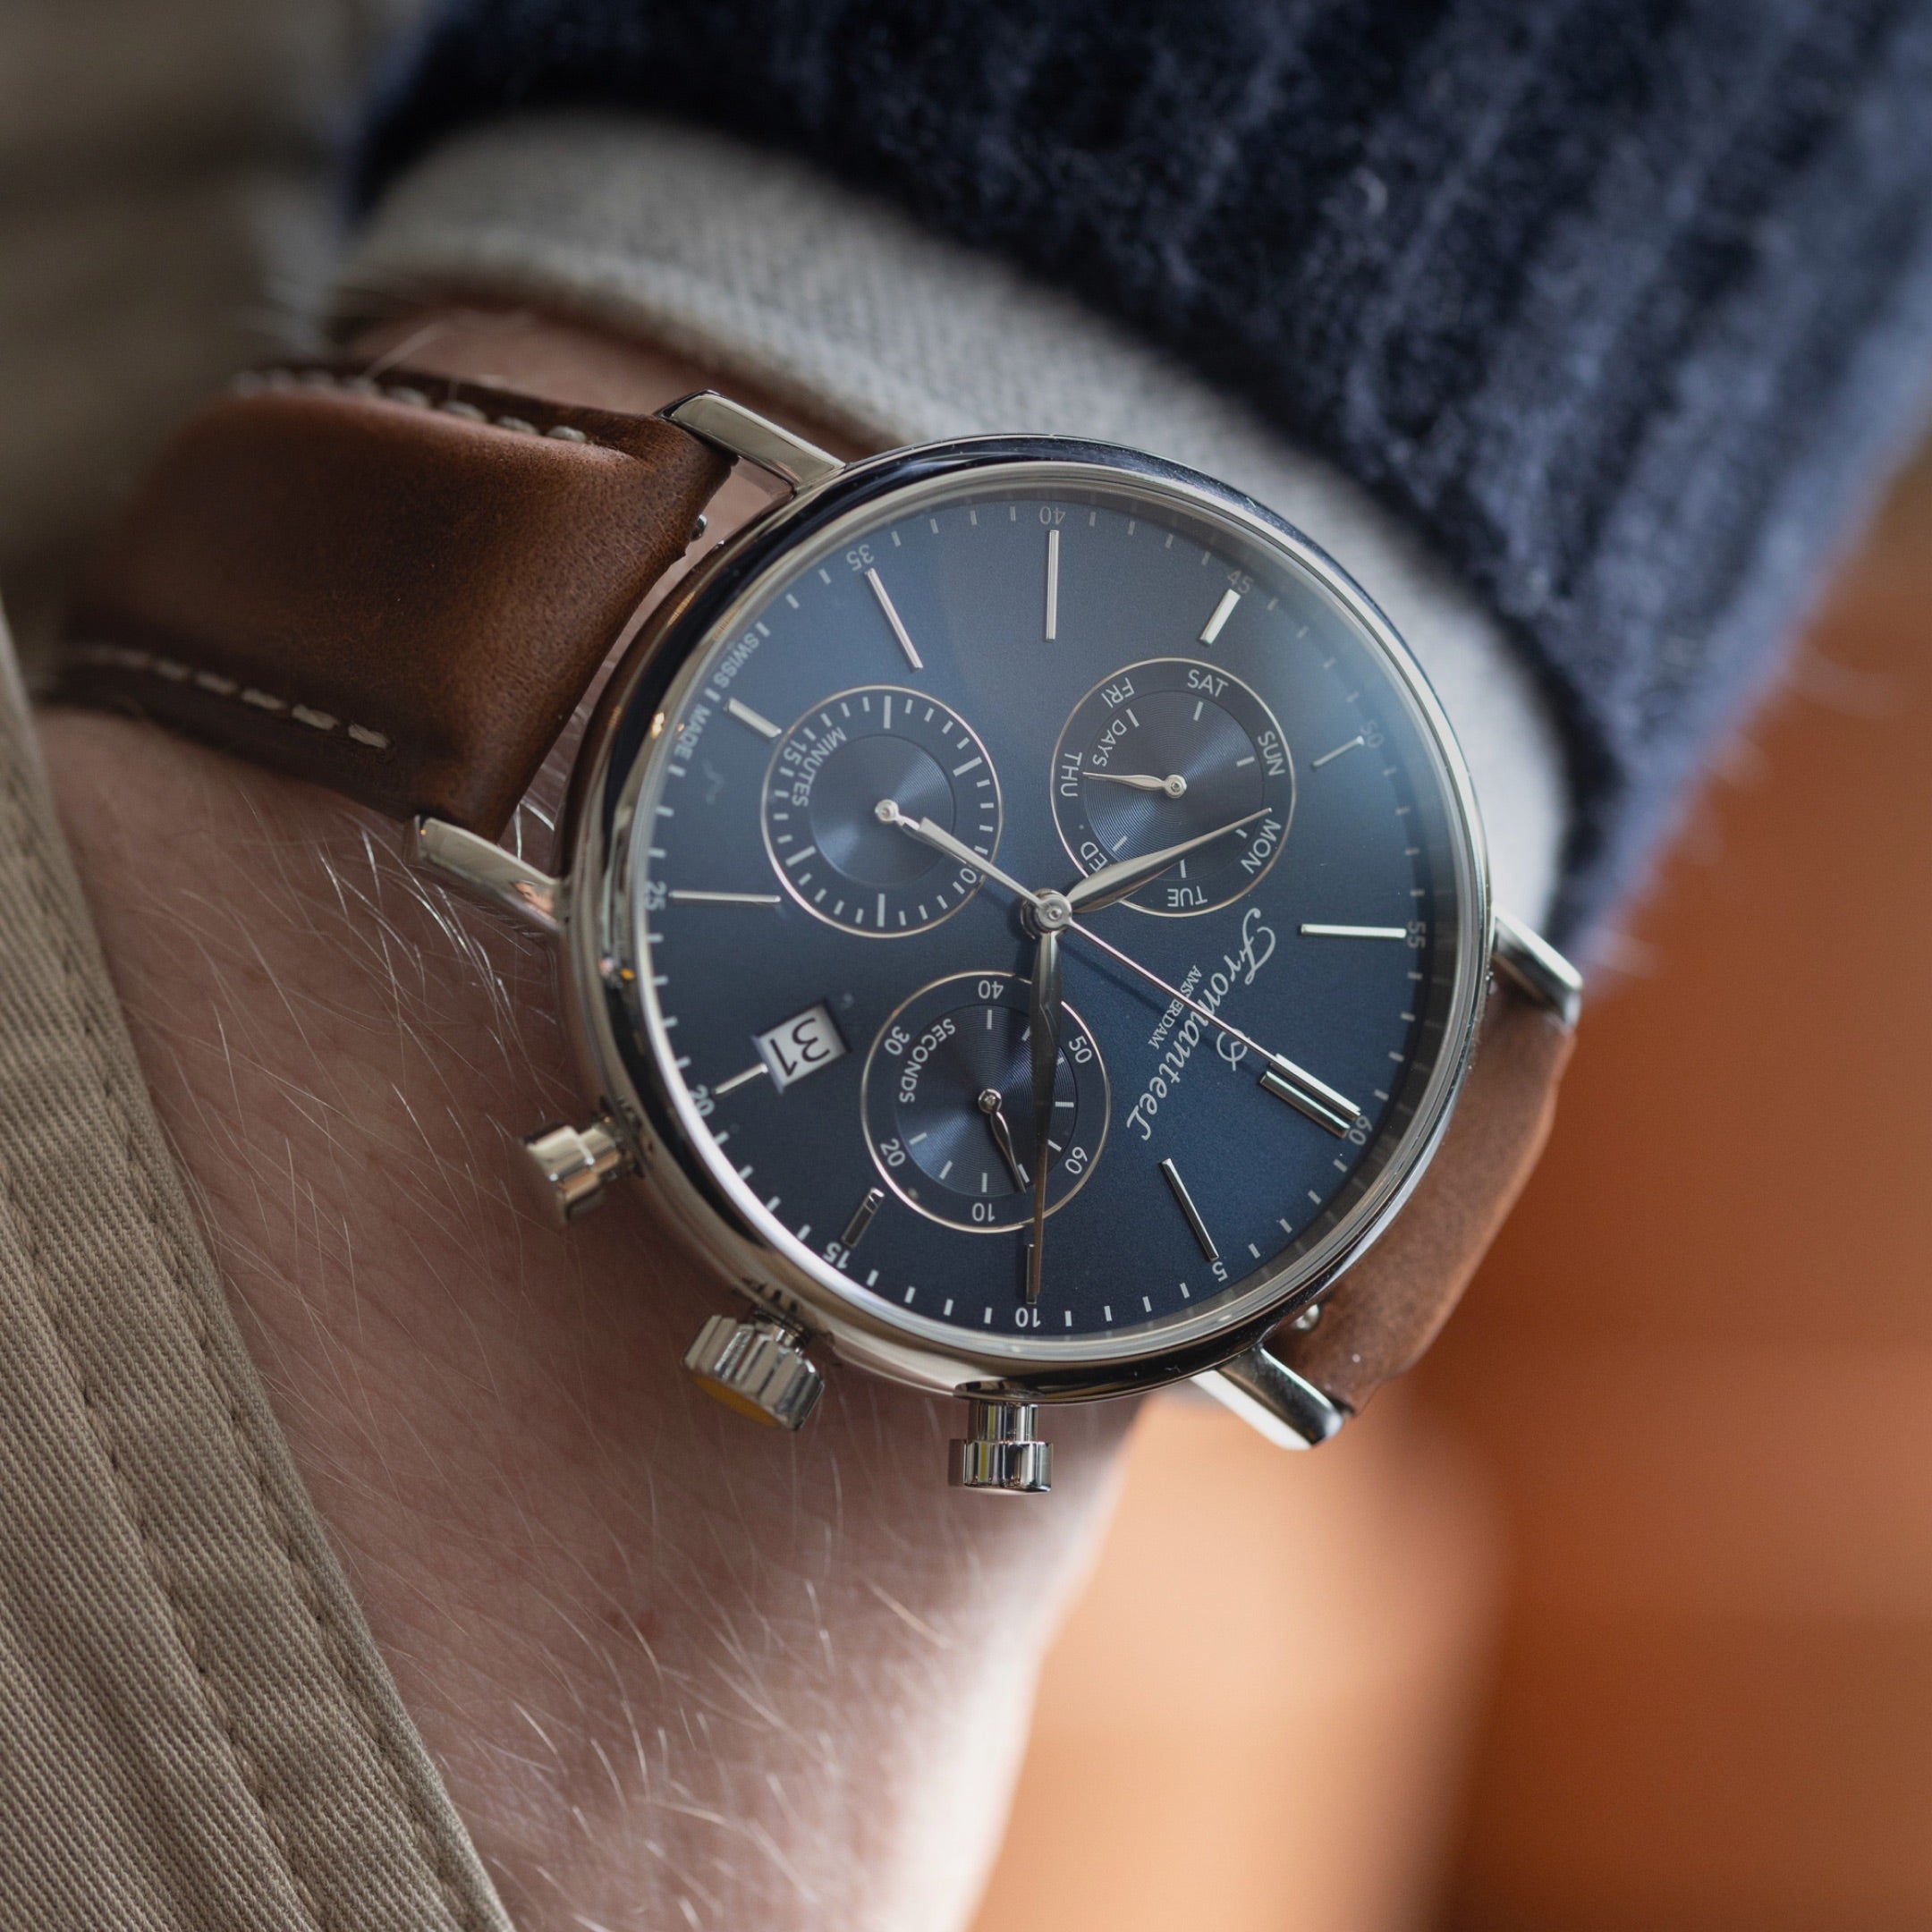 Close-up of the Fromanteel Chrono Blue watch with a brown leather strap on a male wrist.